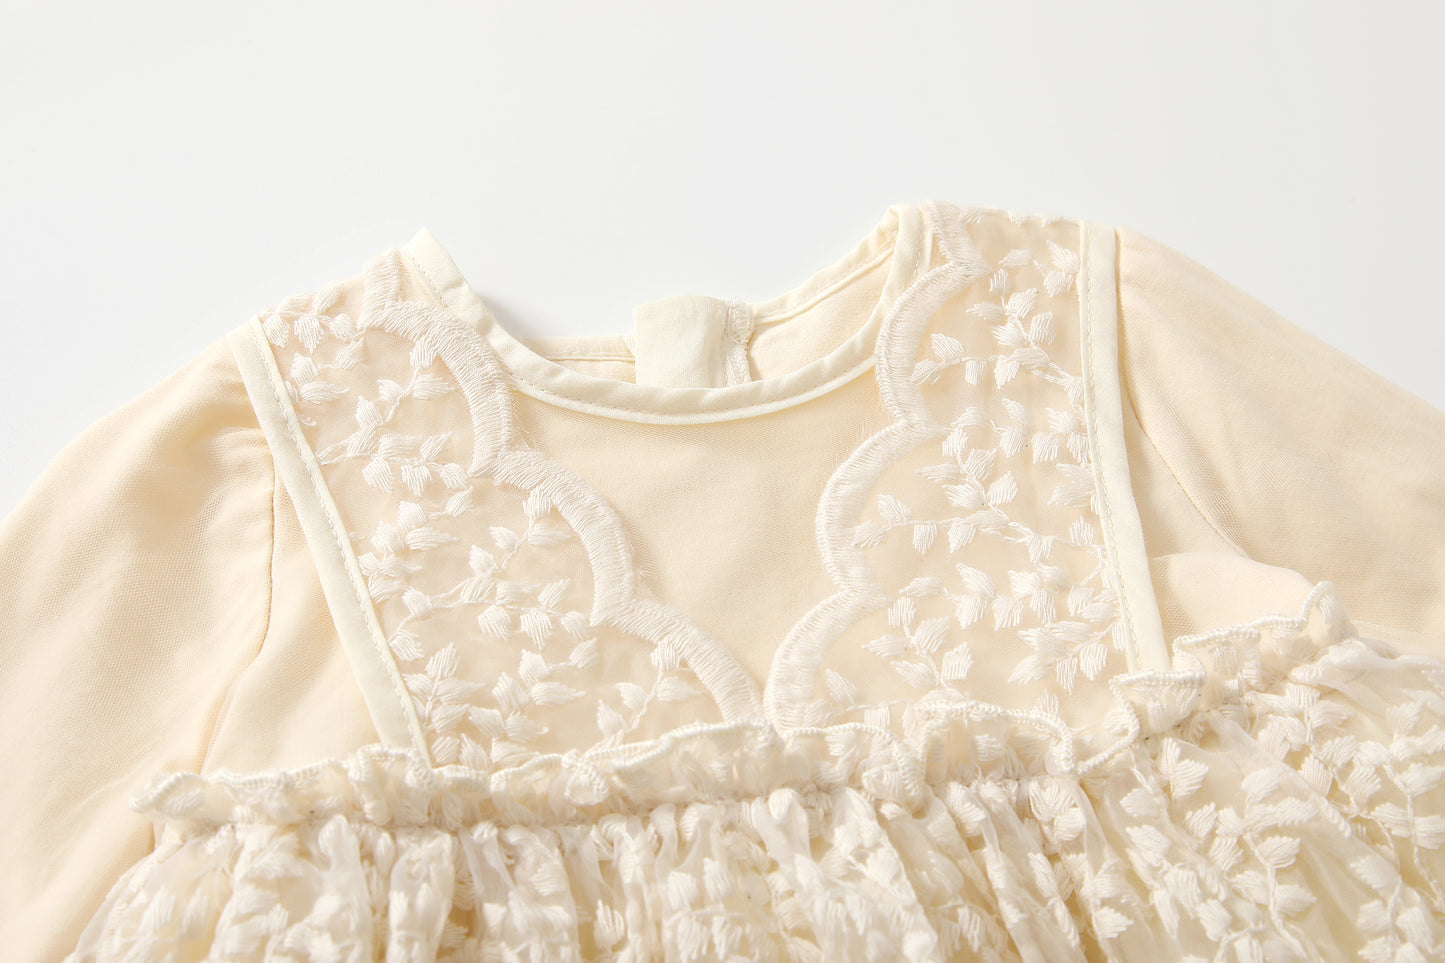 Baby Girl Round Collar Long-Sleeved Lace Party Dress